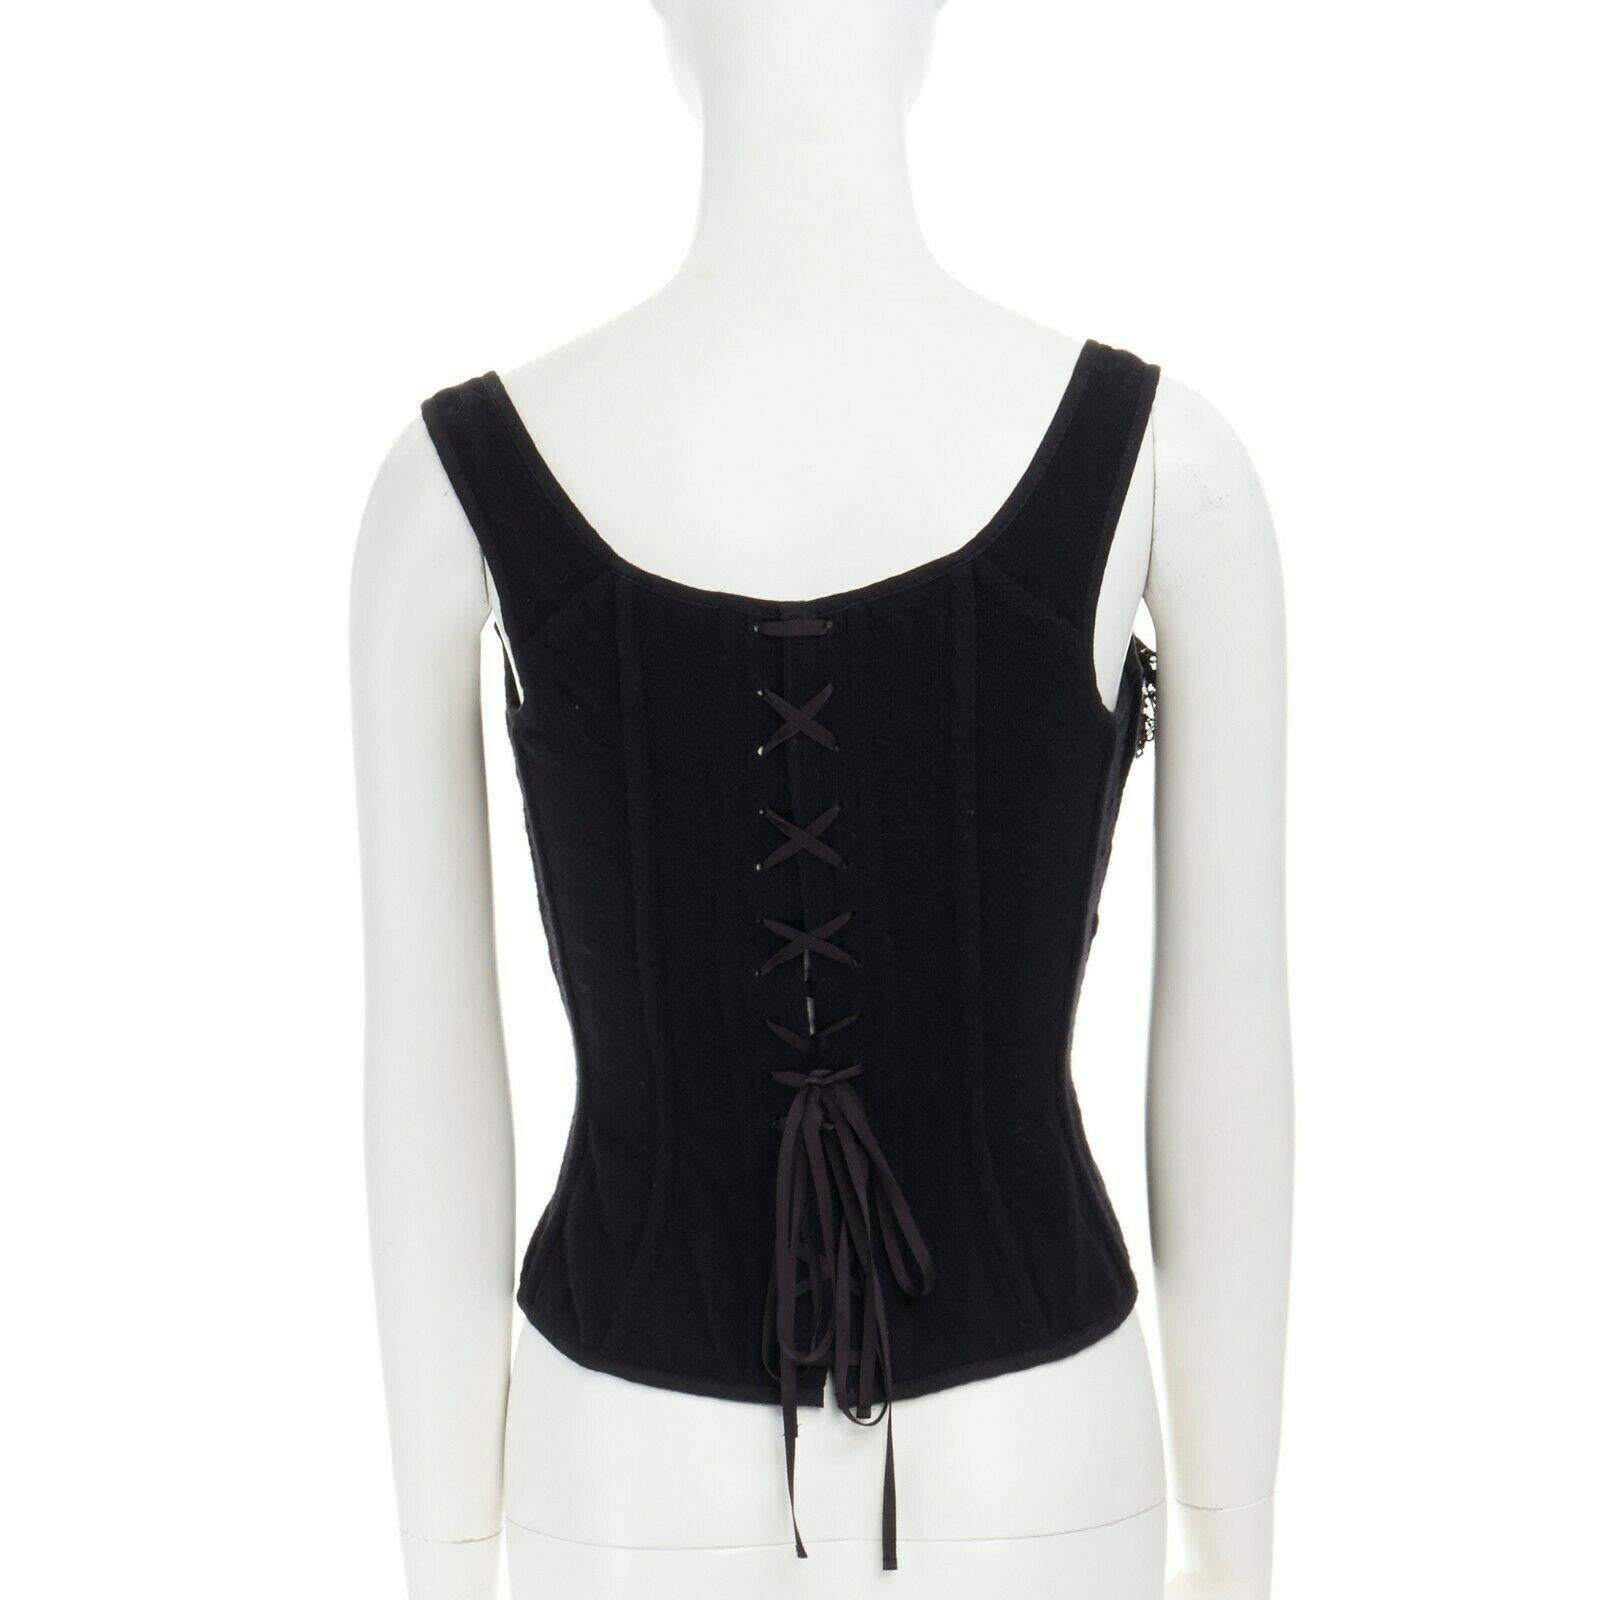 runway TAO COMME DES GARCONS AW2005 black lace ruffle bust laced corset top S
TAO BY COMME DES GARCONS
FROM THE FALL WINTER 2005 COLLECTION
PART OF THE PERMANENT COLLECTION AT THE MUSEUM AT FIT
Wool, nylon, rayon . 
Black wool . 
Corset top .